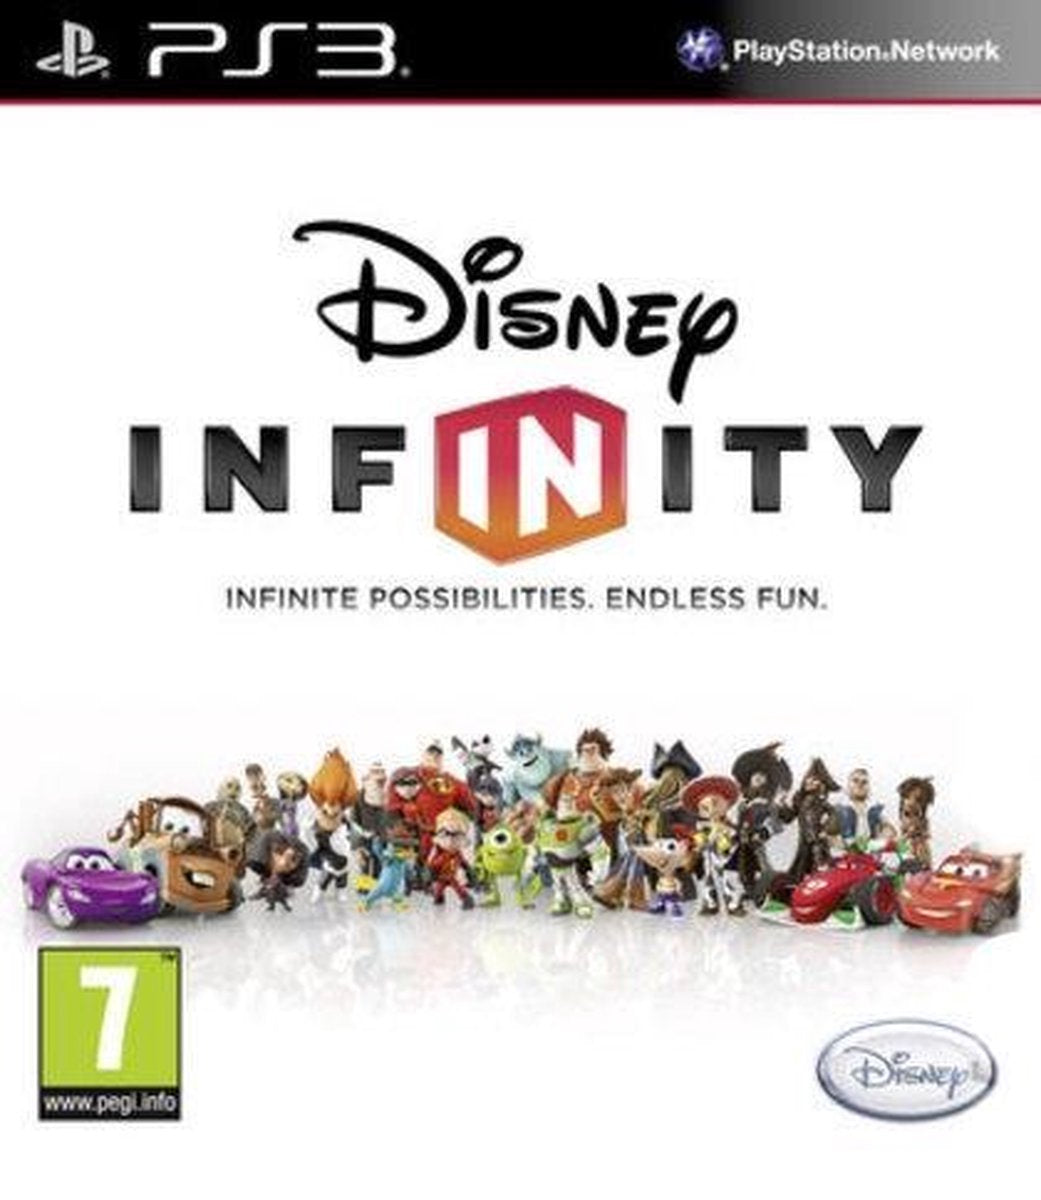 PS3 DISNEY INFINITY (Game only)  - USADO